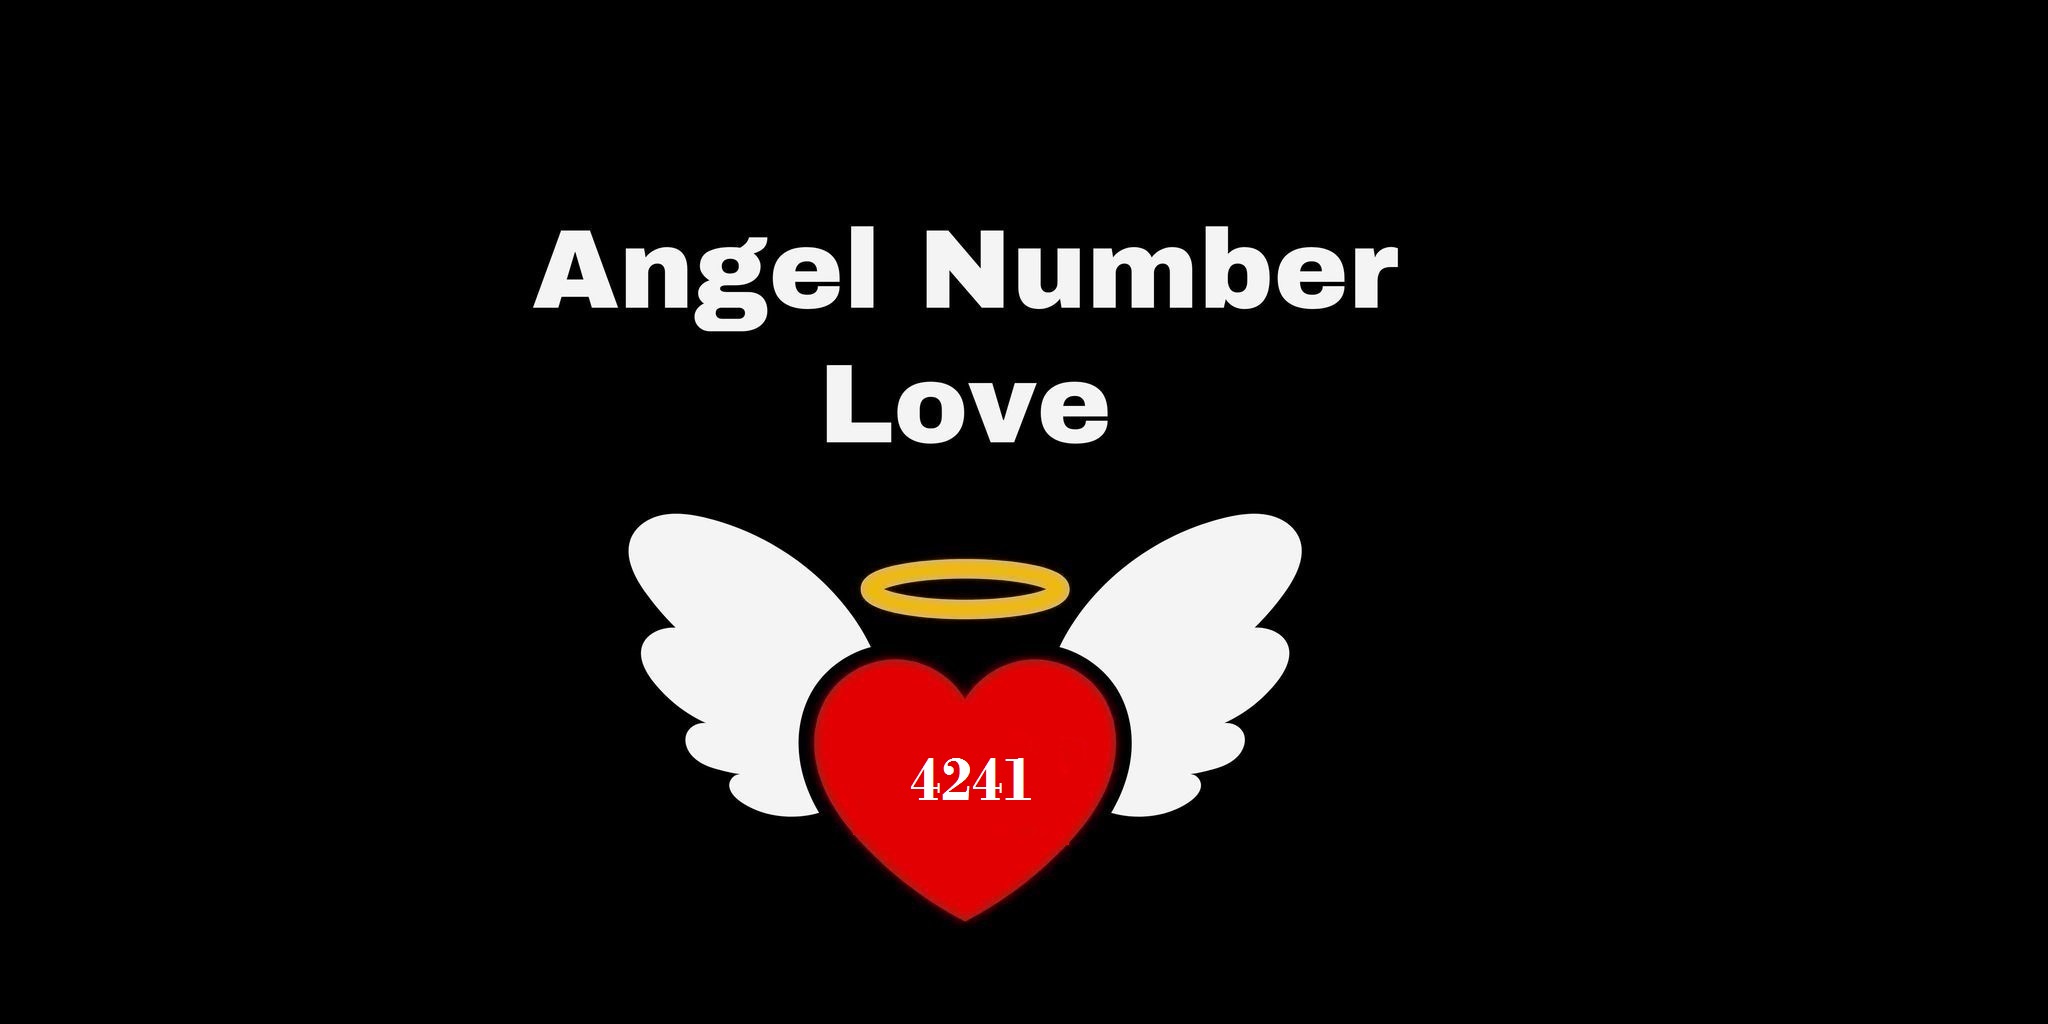 4241 Angel Number Meaning In Love